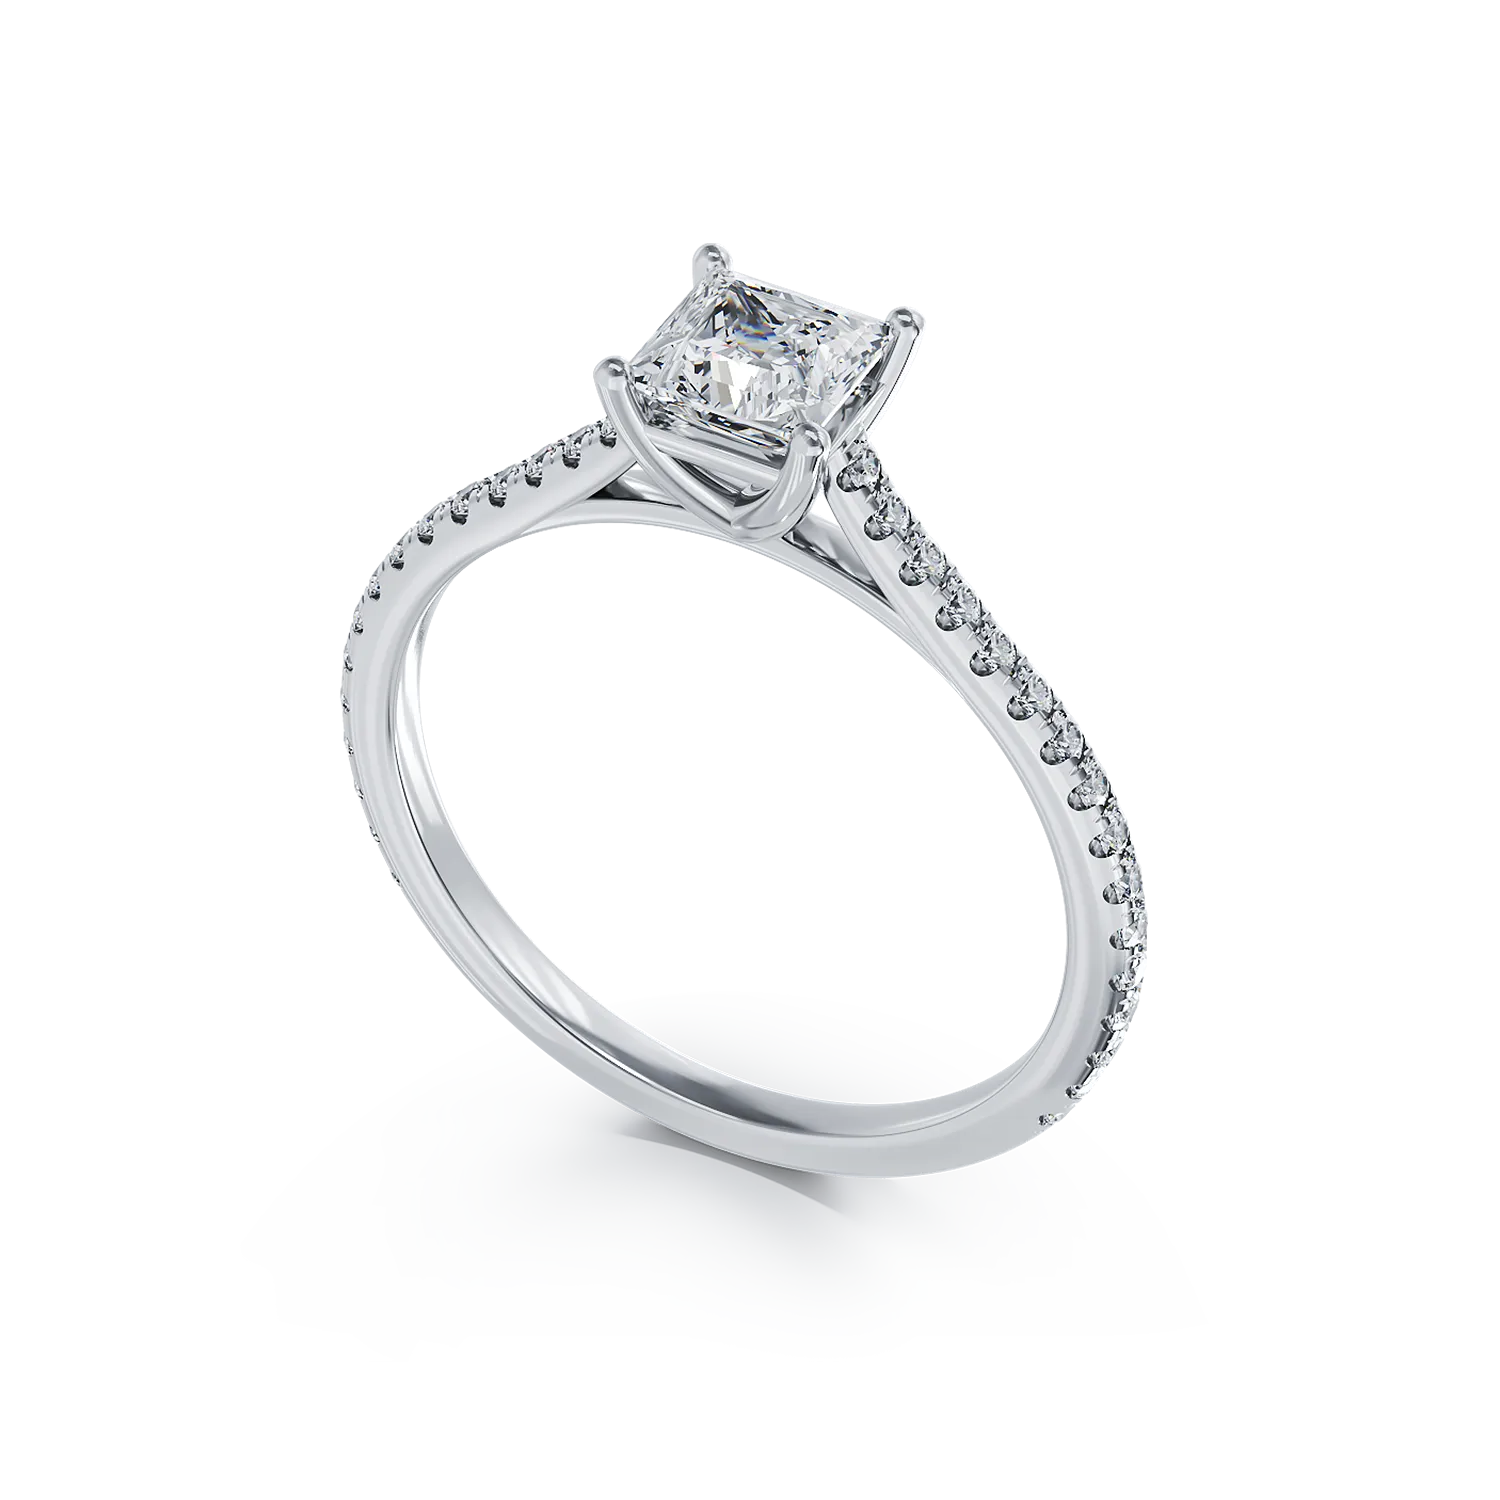 18K white gold engagement ring with one 0.6ct diamond and 0.178ct diamonds